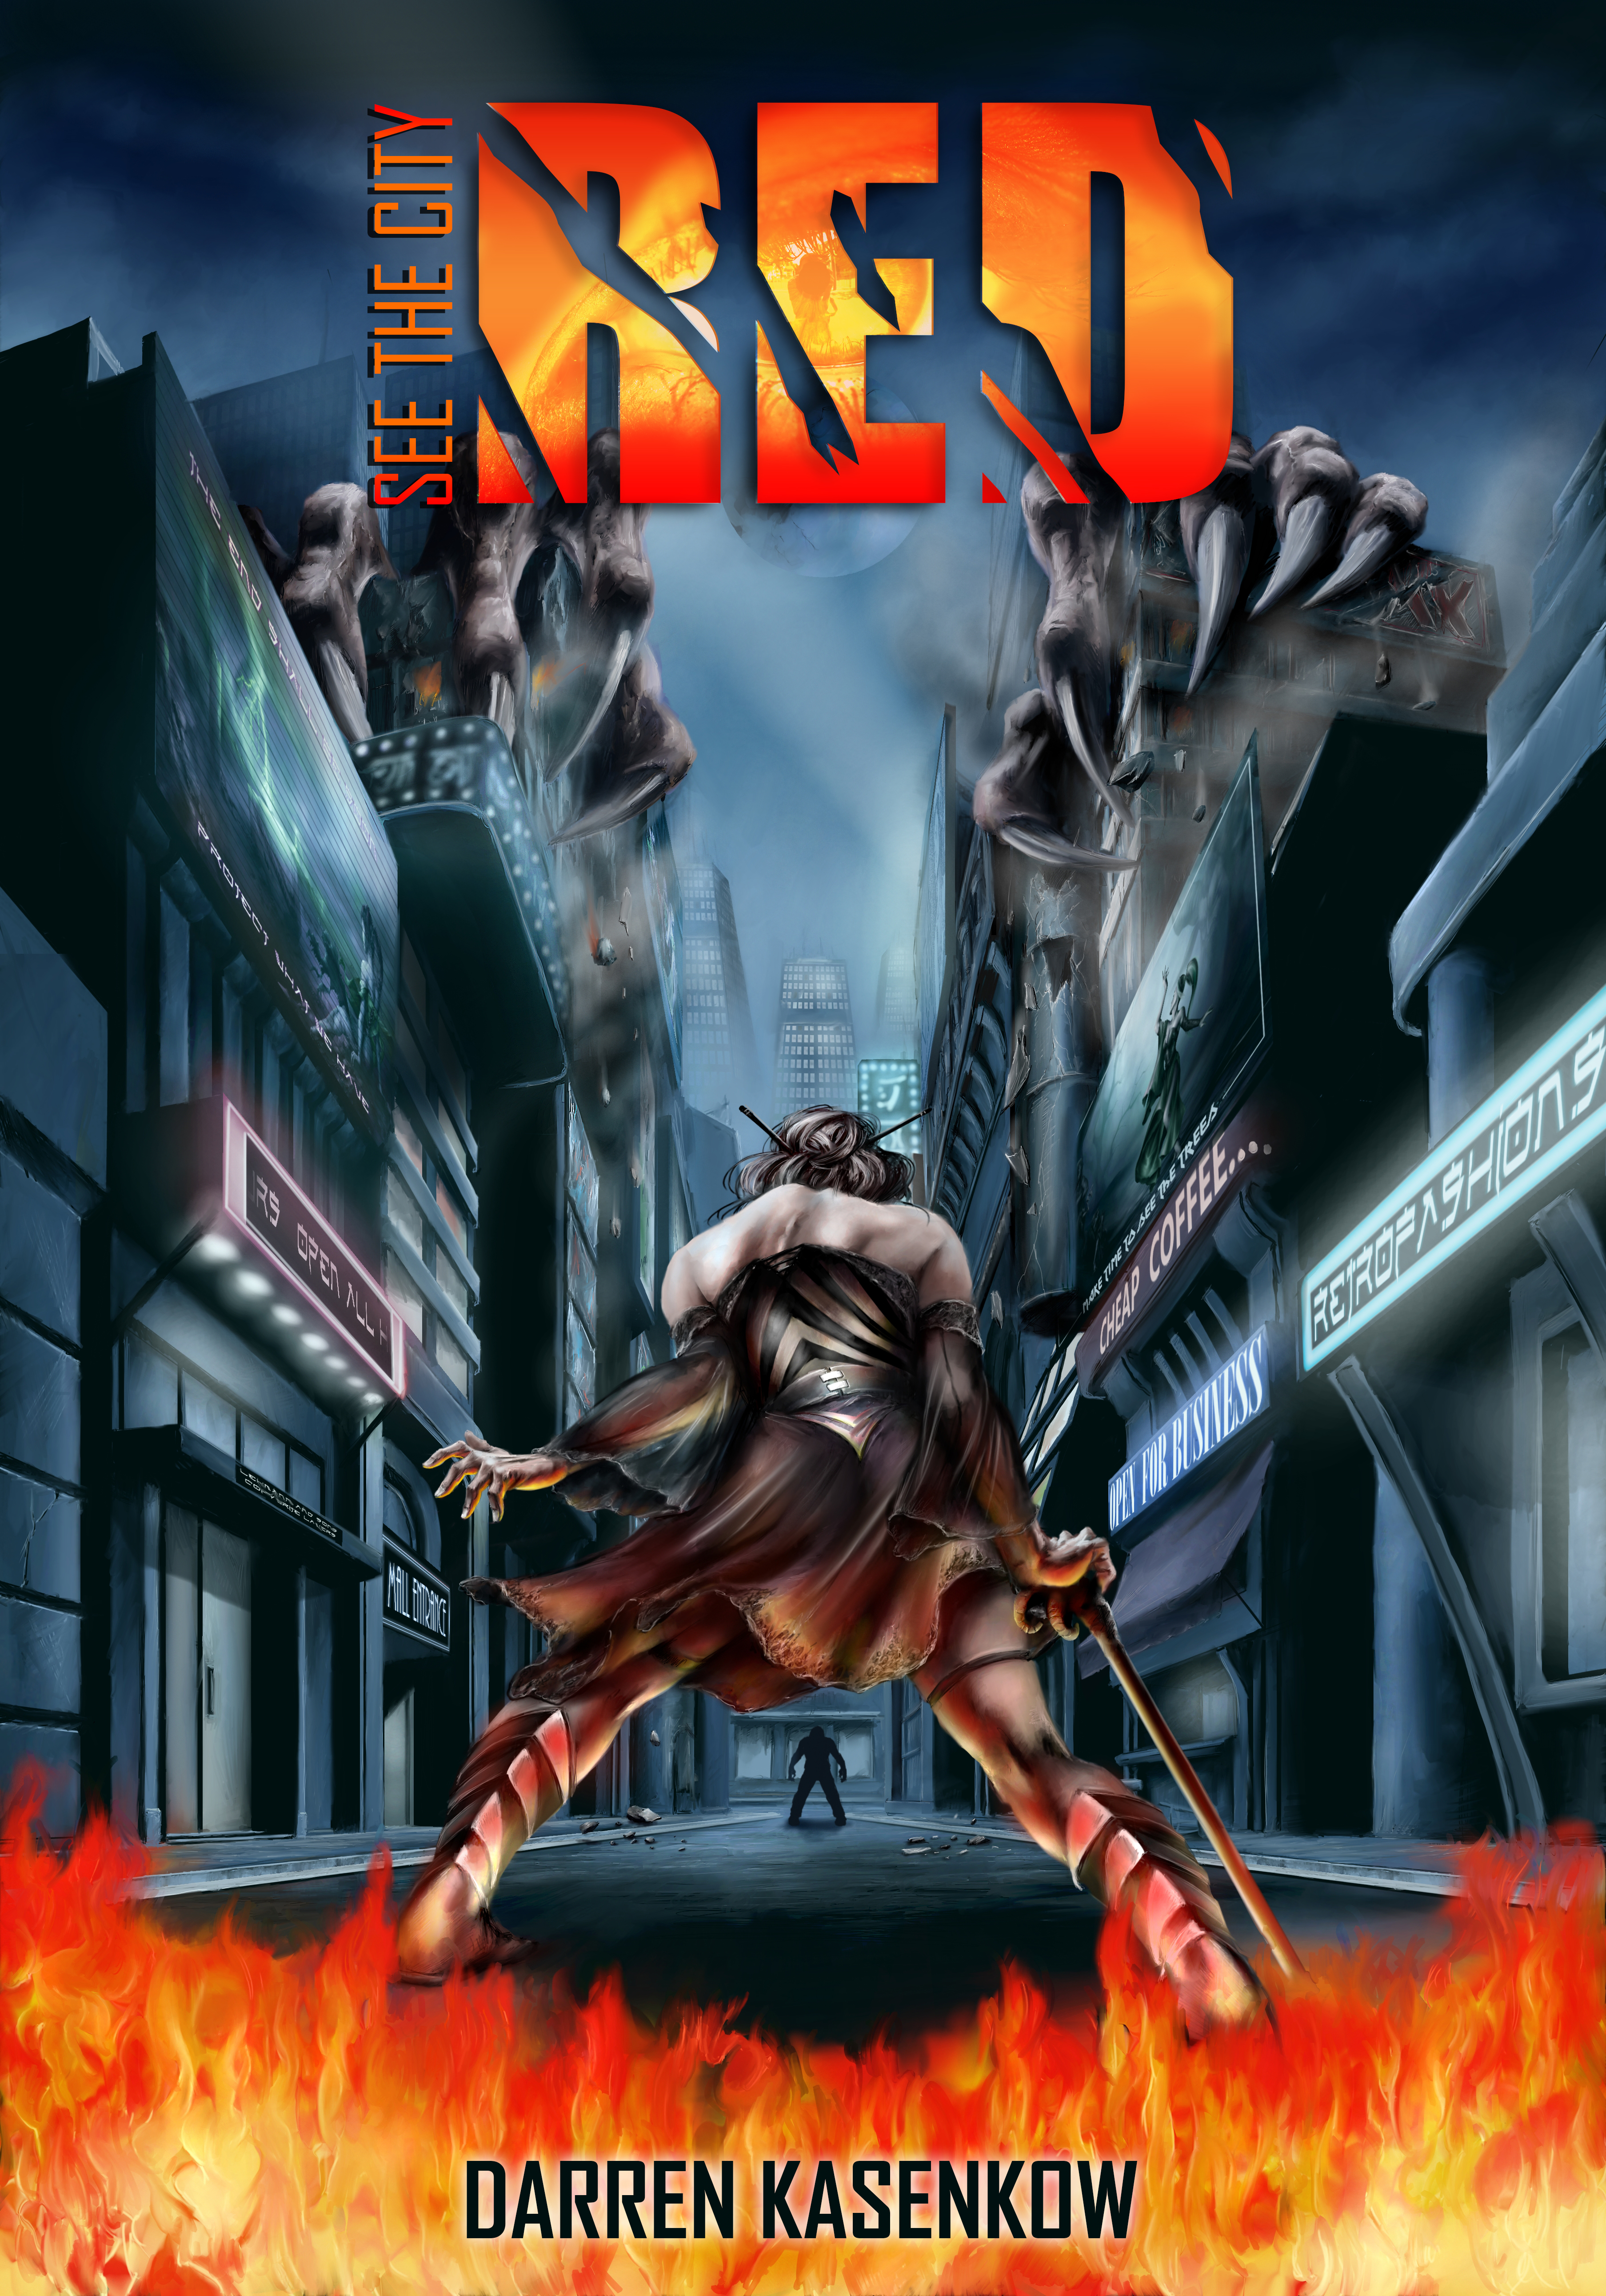 FREE: See The City Red by Darren Kasenkow